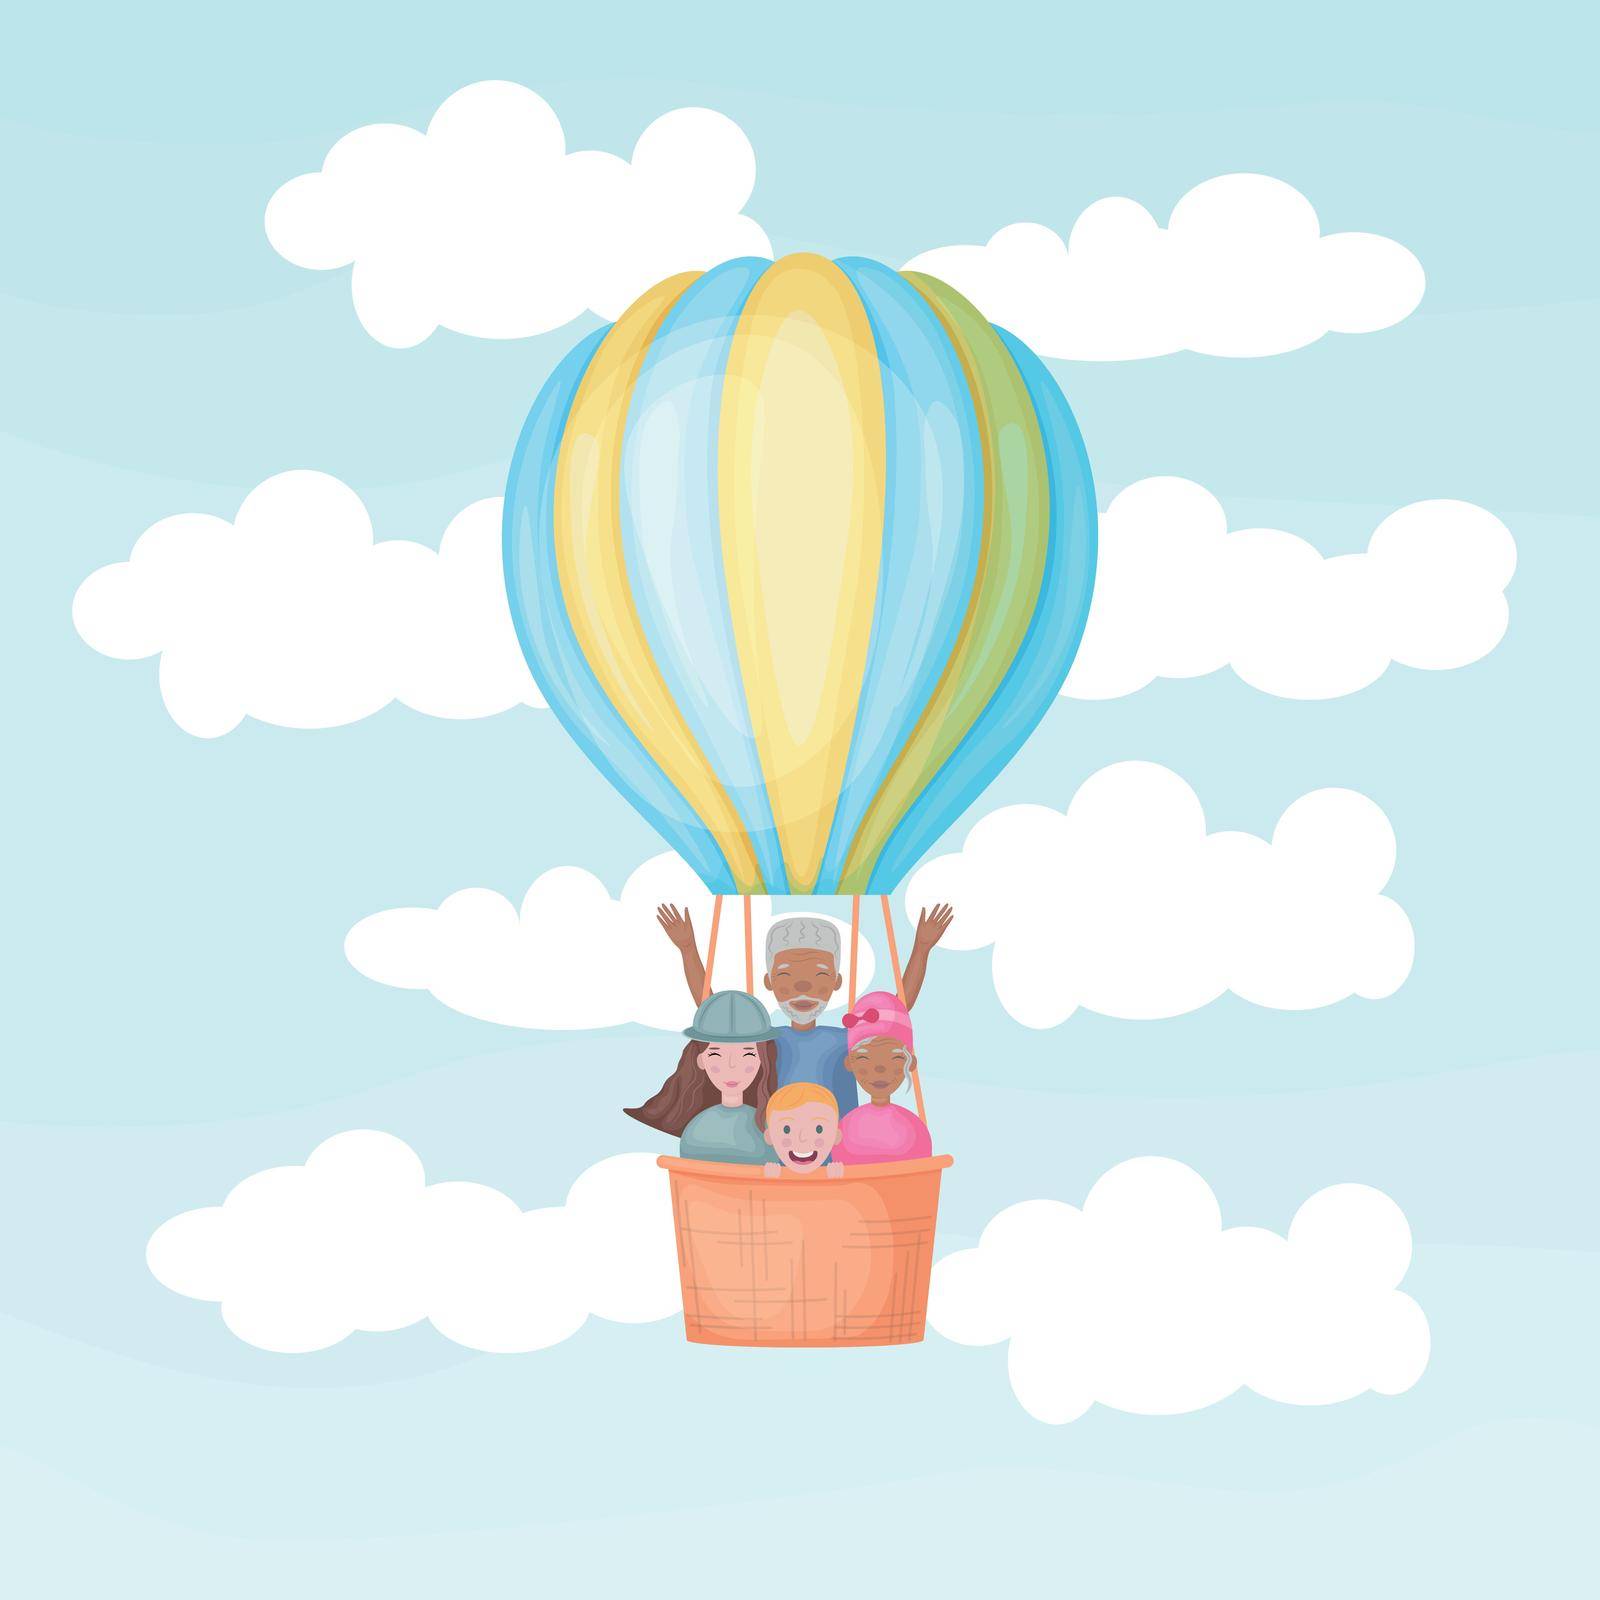 Air balloon. Hot air balloon with people. Black and white people fly in a balloon. People with different skin colors are flying across the sky. Vector illustration isolated on a white background.